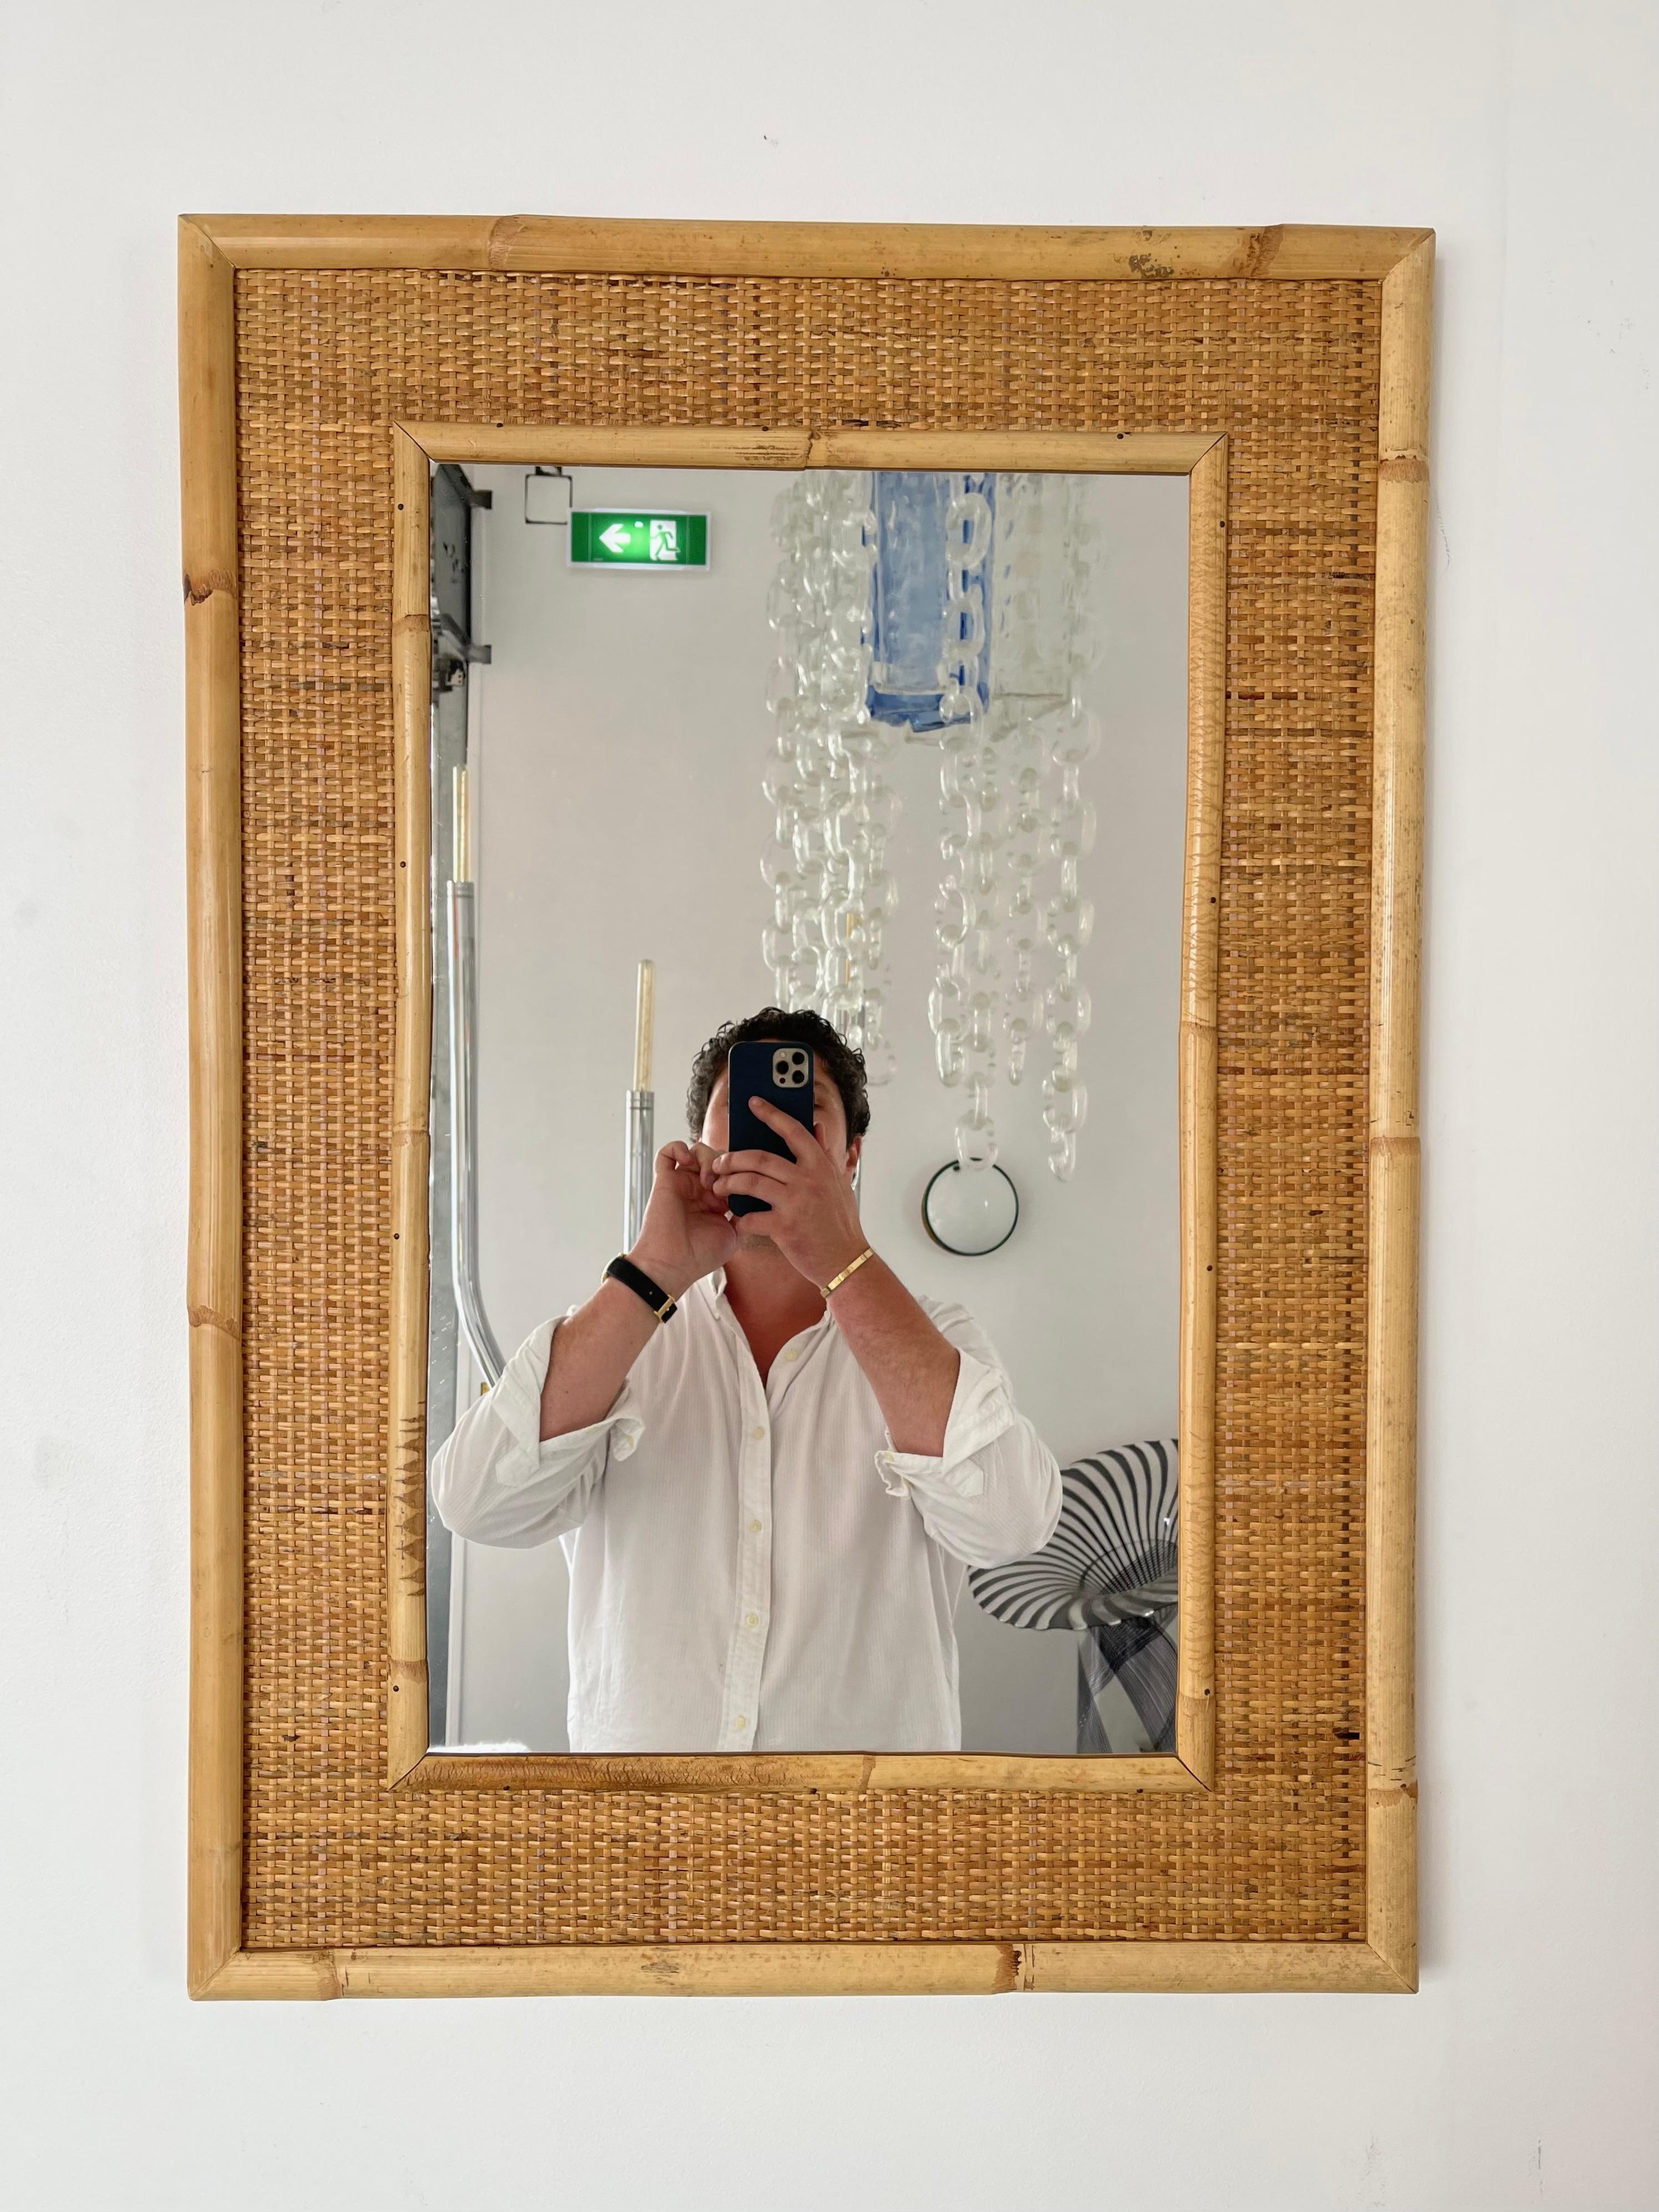 Mid-Century Modern Hollywood Regency Wall mirror nice mix of bamboo, rattan raffia wicker by the manufacture Dal Vera. Famous design like Renato Zevi, Romeo Rega, Maison Jansen, Willy Rizzo, Mario Sabot.

2 mirror available. In sale separately.
For